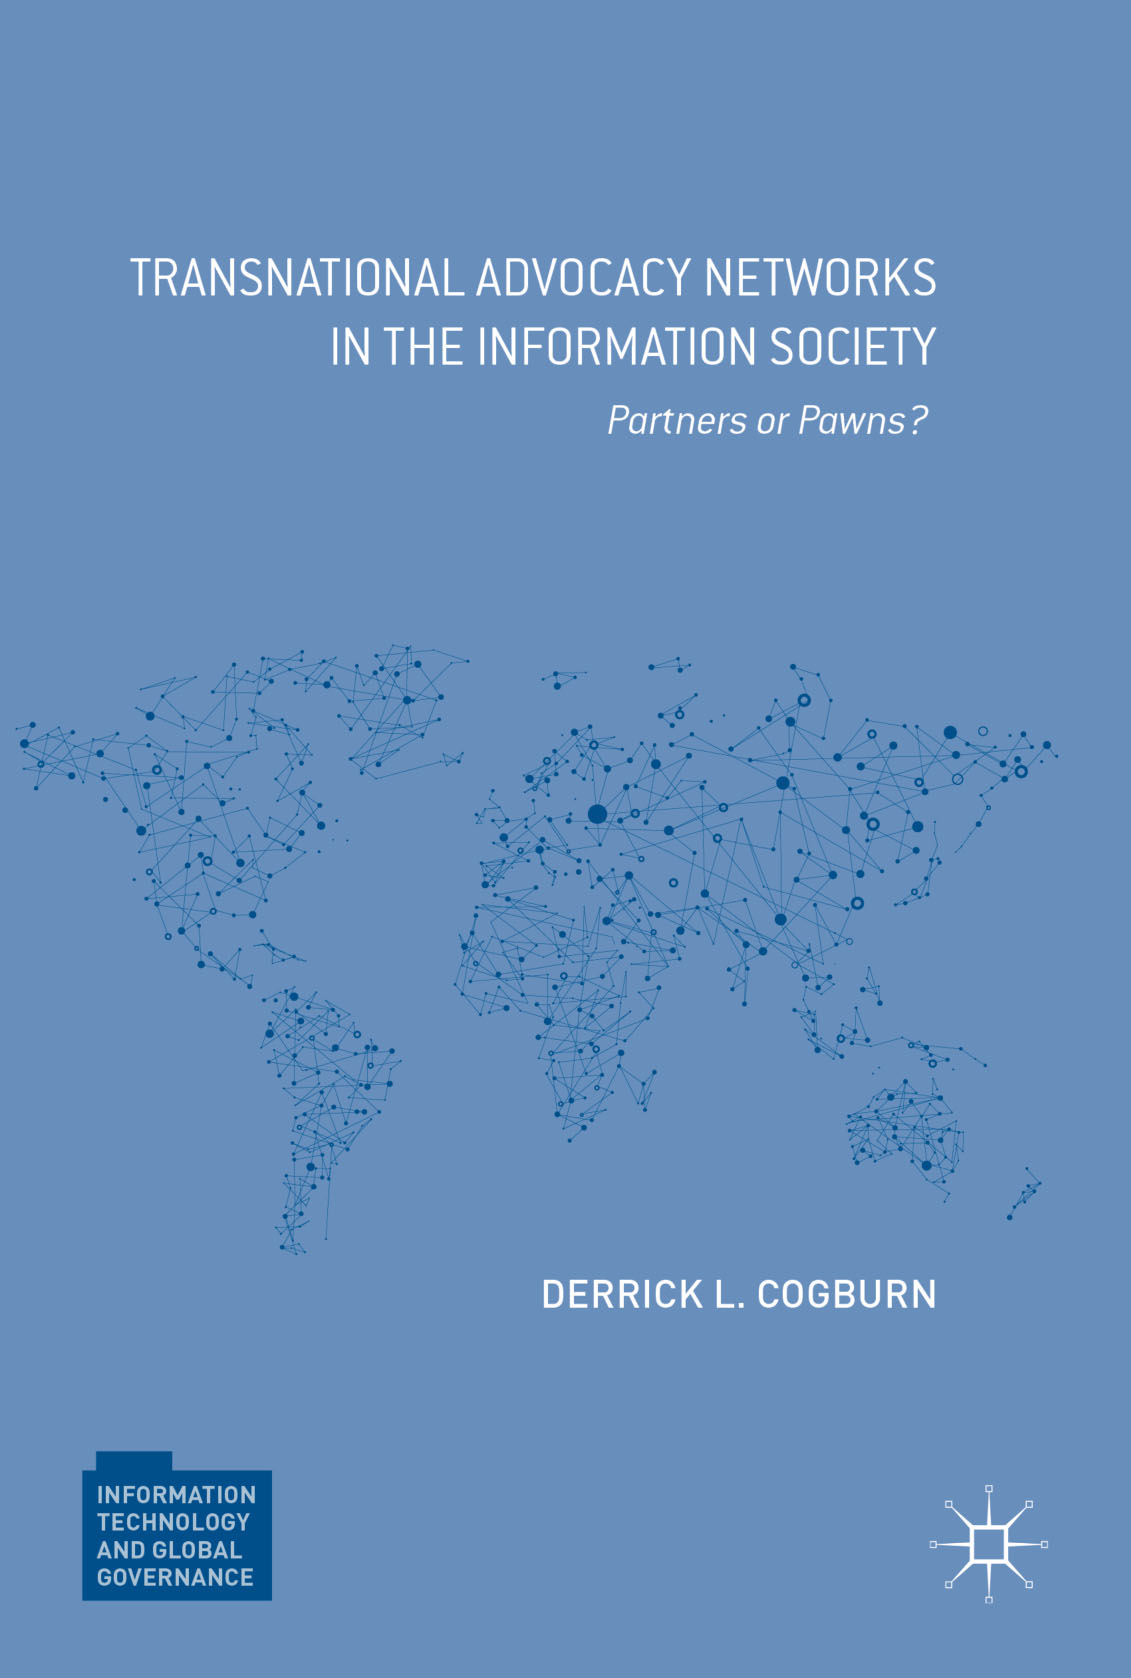 Transnational Advocacy Networks - Book Cover.jpg